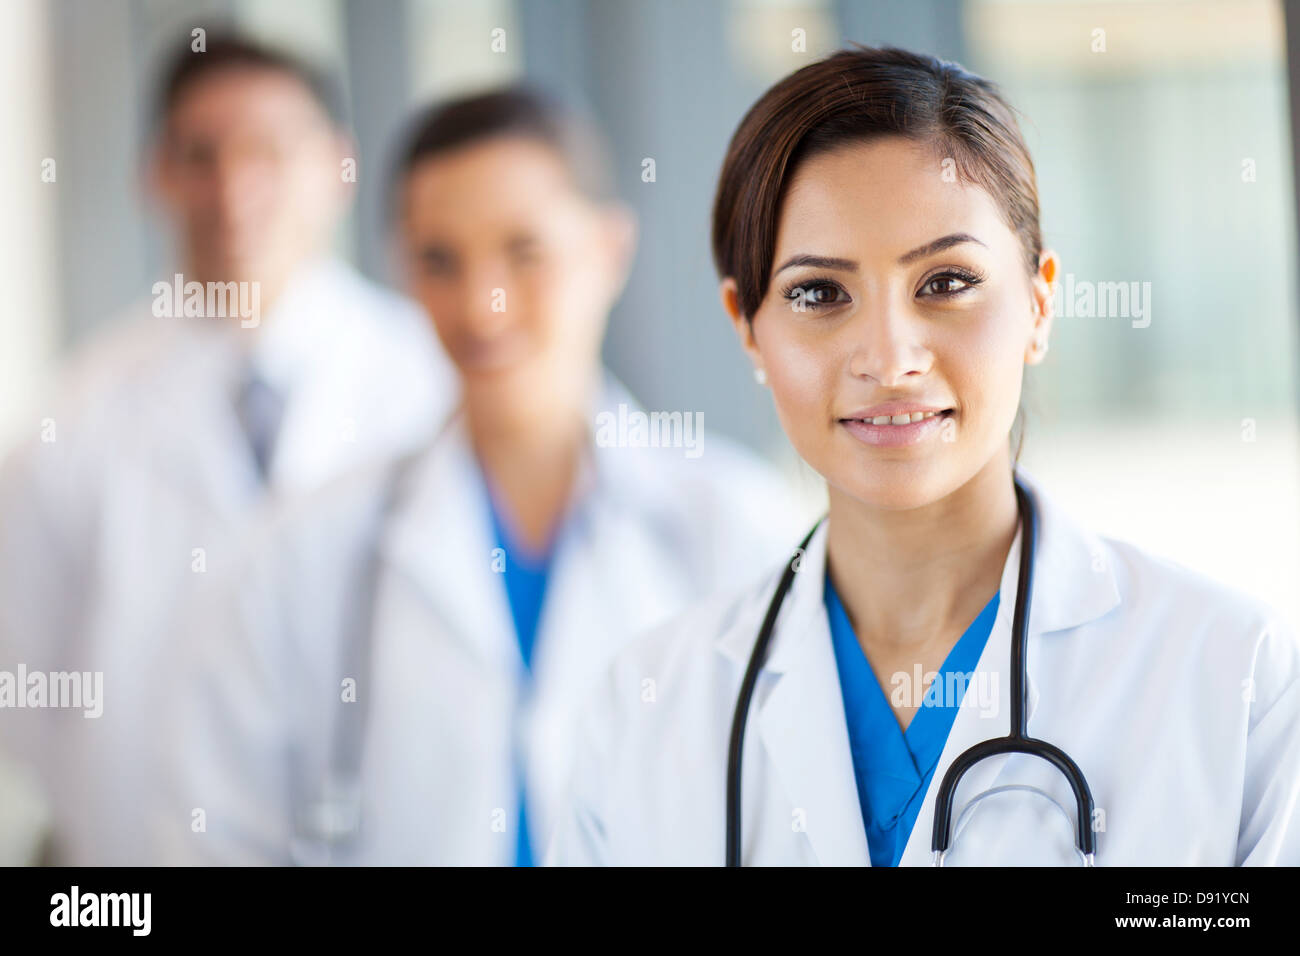 beautiful healthcare workers portrait in hospital Stock Photo